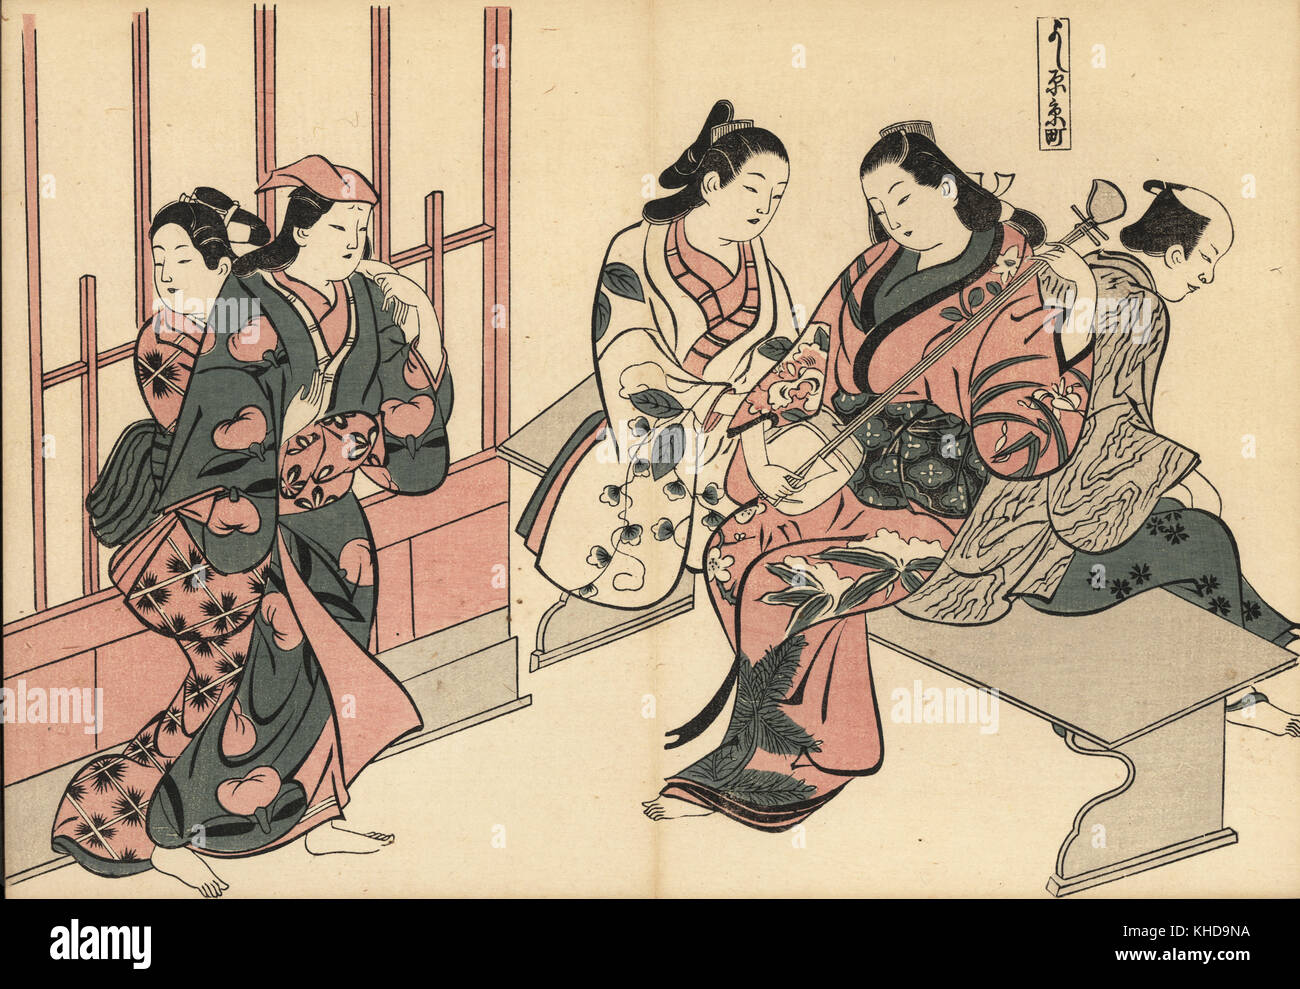 Courtesans playing shamisen and dancing in Kyomachi, Yoshiwara. They sit outside a barred teahouse in the pleasure quarters. Woodblock print by Masanobu Okumura (1686-1764) from Fuzoku Emakimono, Picture Scroll of the Water Trade, Tokyo, reprint circa 1880. Stock Photo